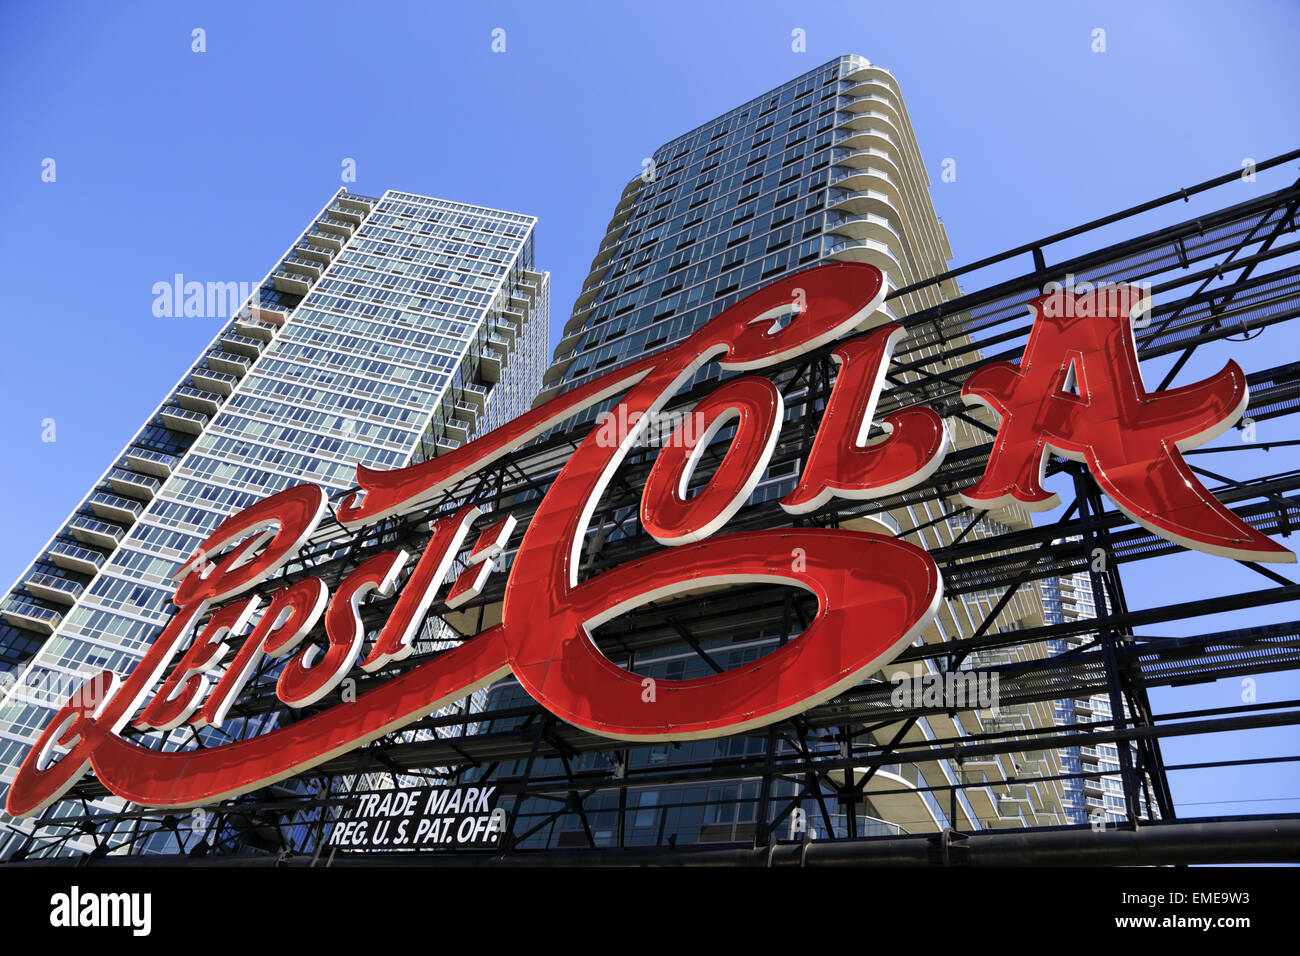 Pepsi Cola billboard in Gantry Plaza State Park with high-rise apartment building in background.Long Island City.Queens, New York. USA Stock Photo